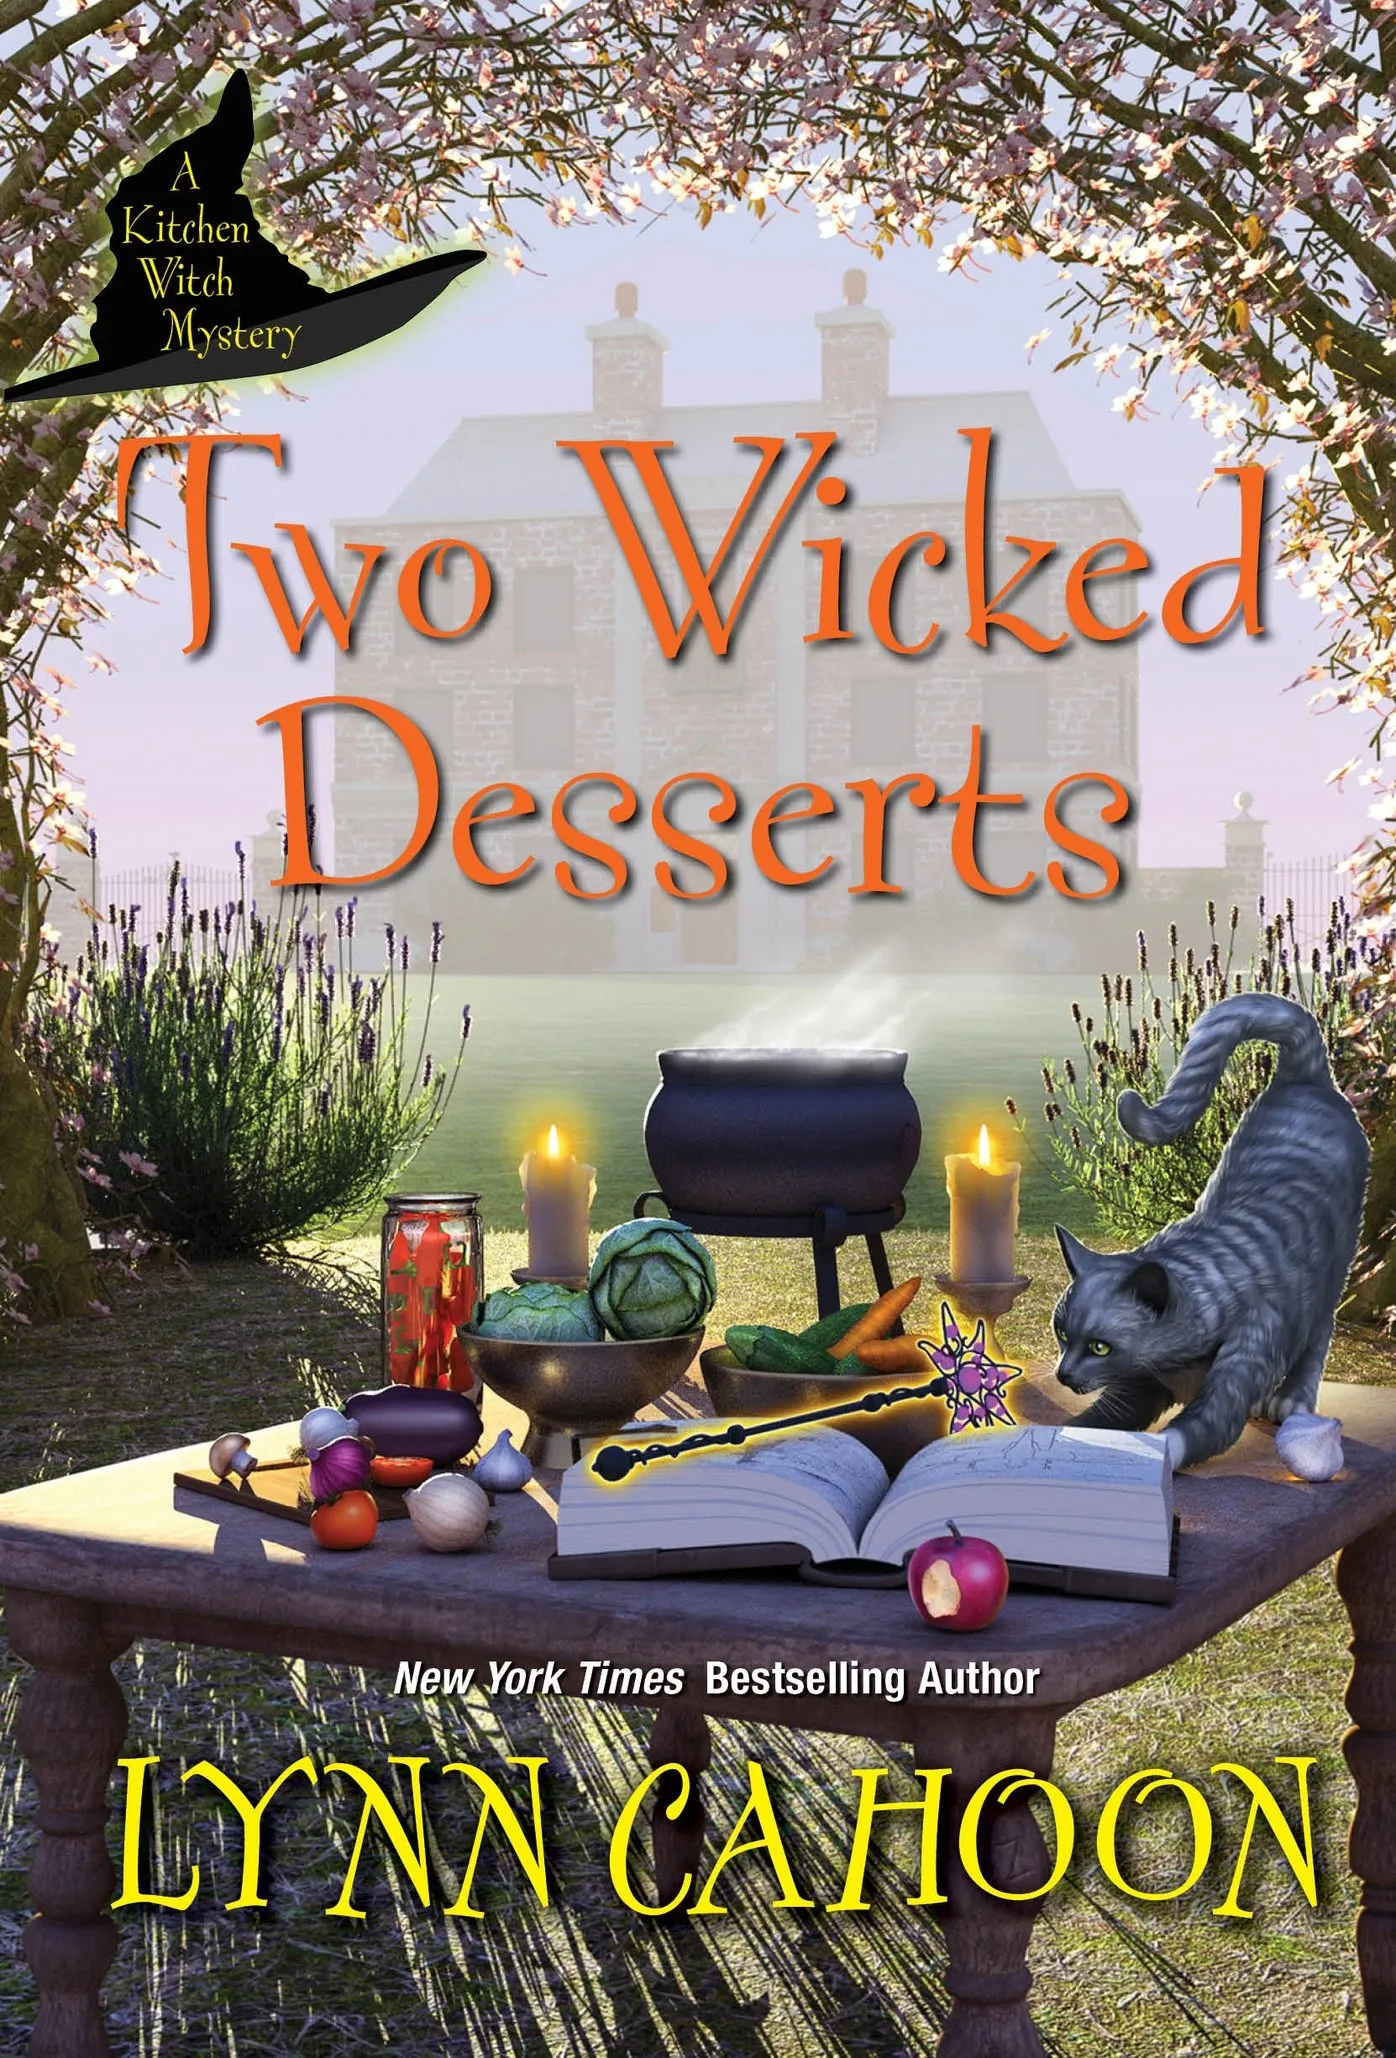 Two Wicked Desserts (Kitchen Witch Mysteries #2)